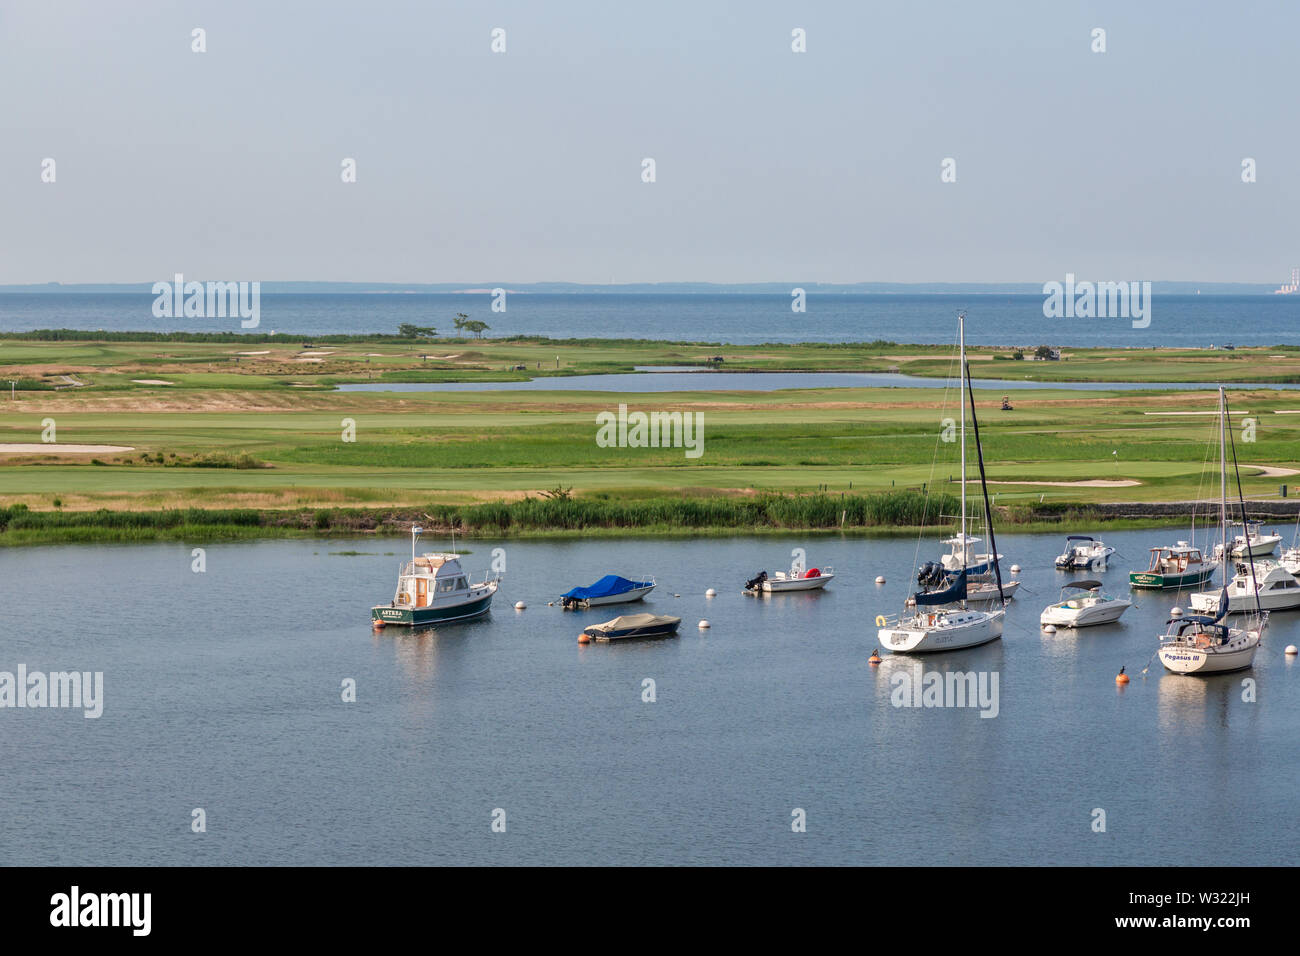 boats on moorings in Southport, CT Stock Photo